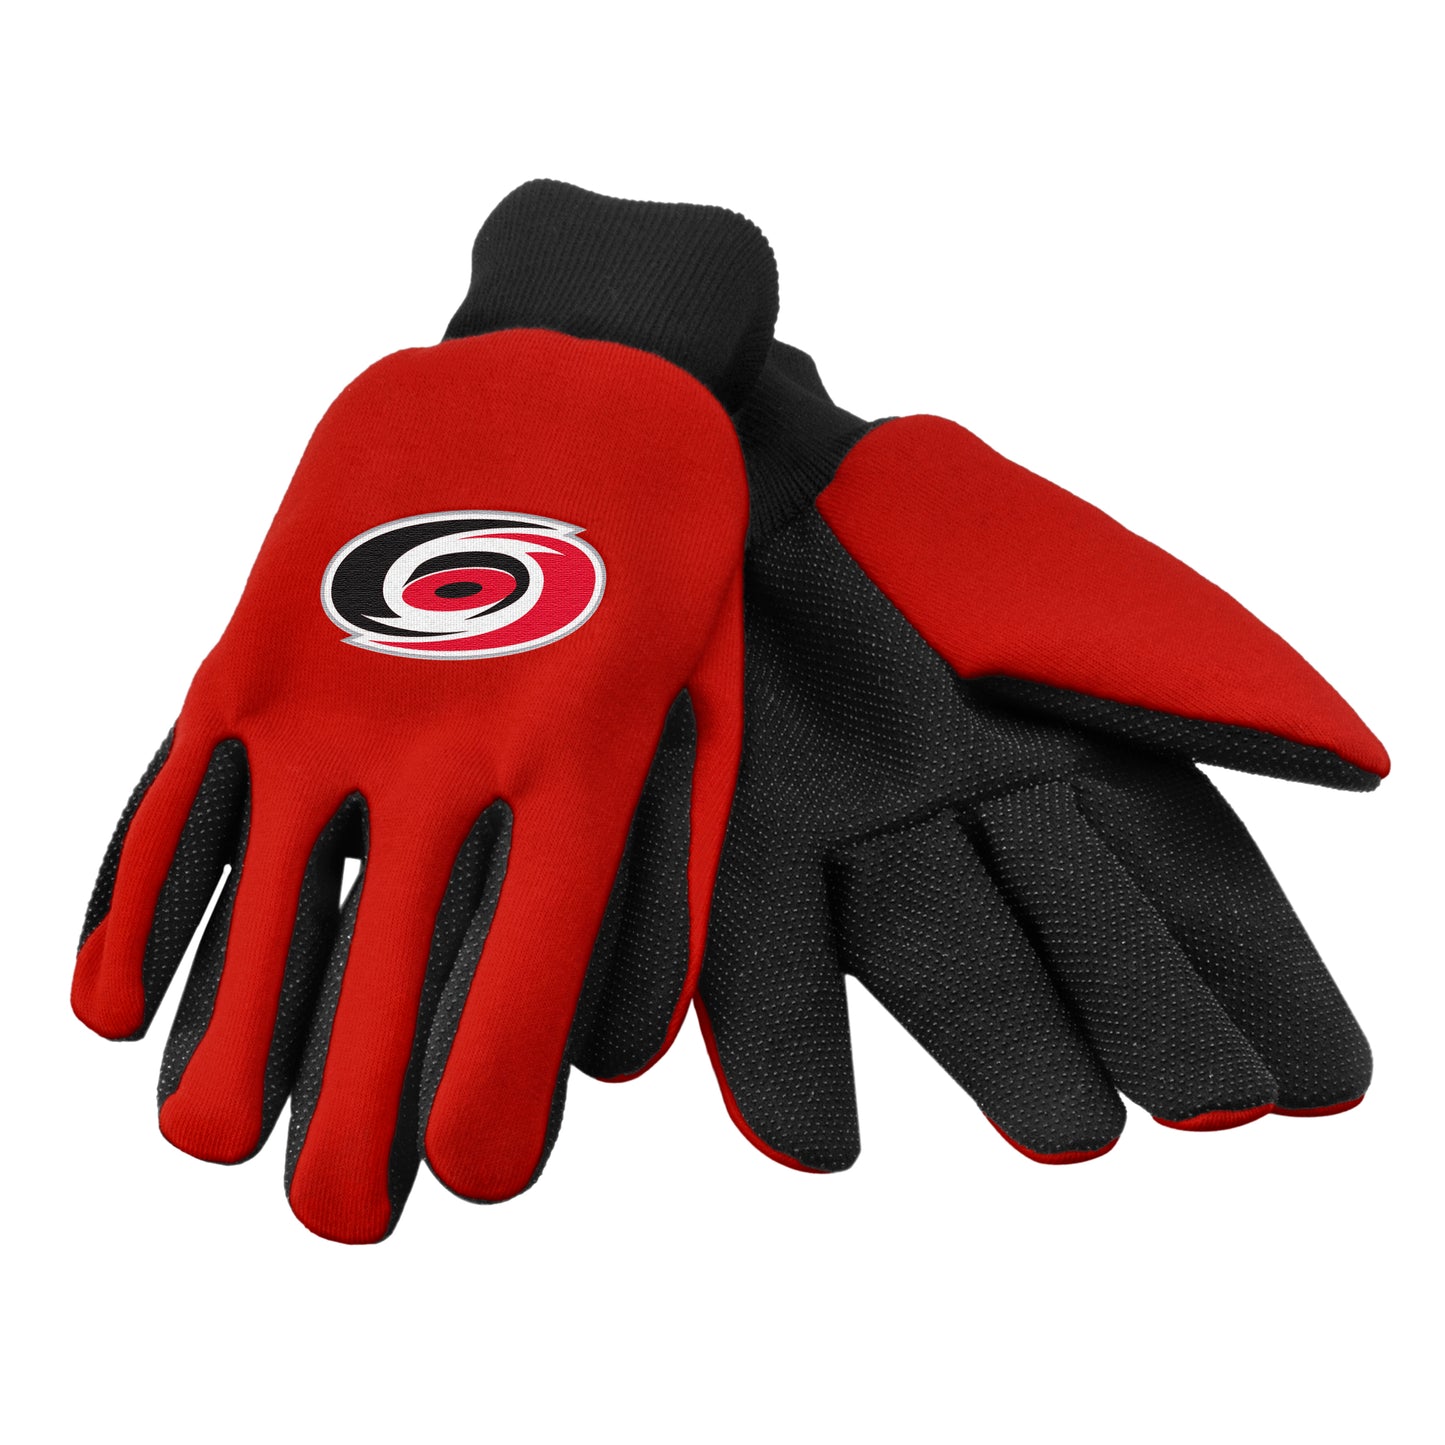 Red and black utility gloves with Hurricanes logo on back of hands